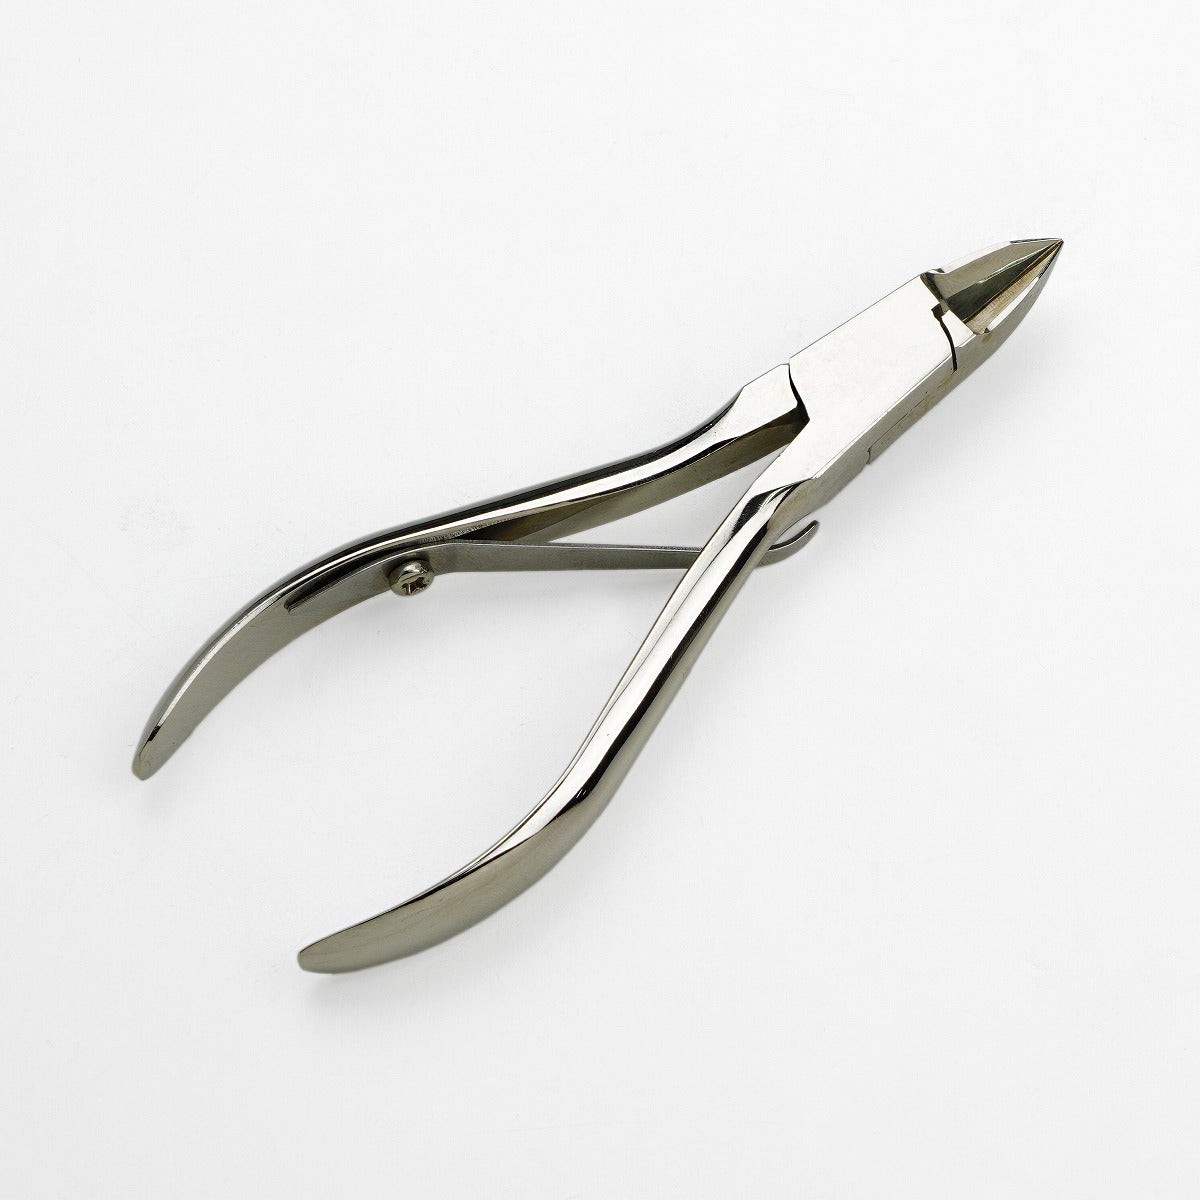 Nail Clippers Nipper Type, Tokyo Craftsman Made